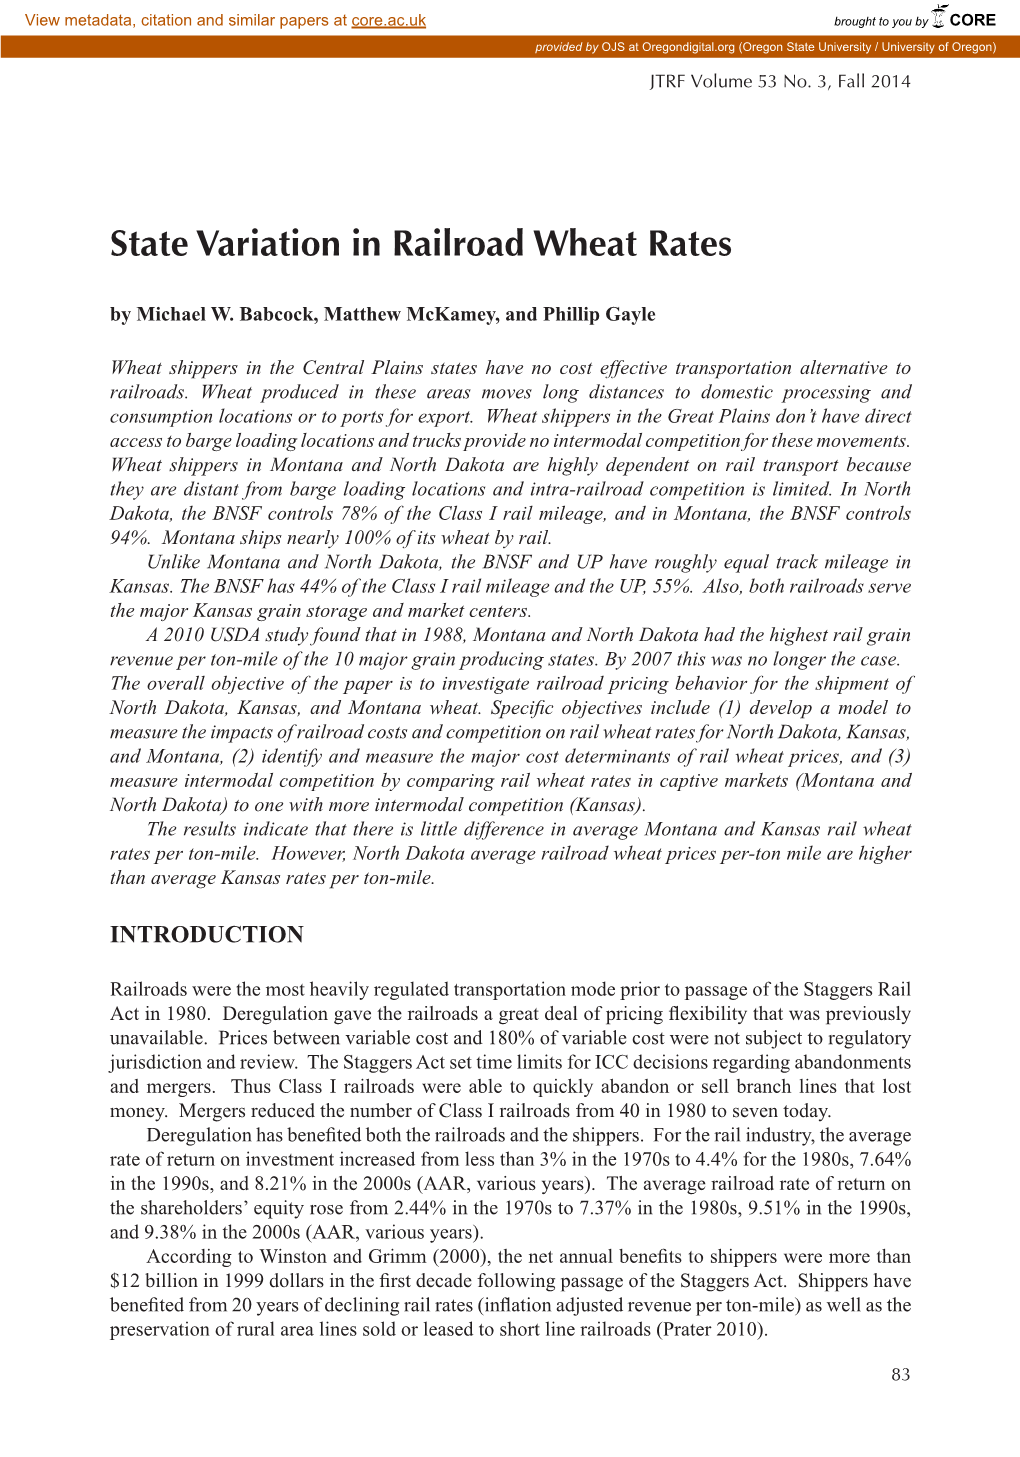 State Variation in Railroad Wheat Rates